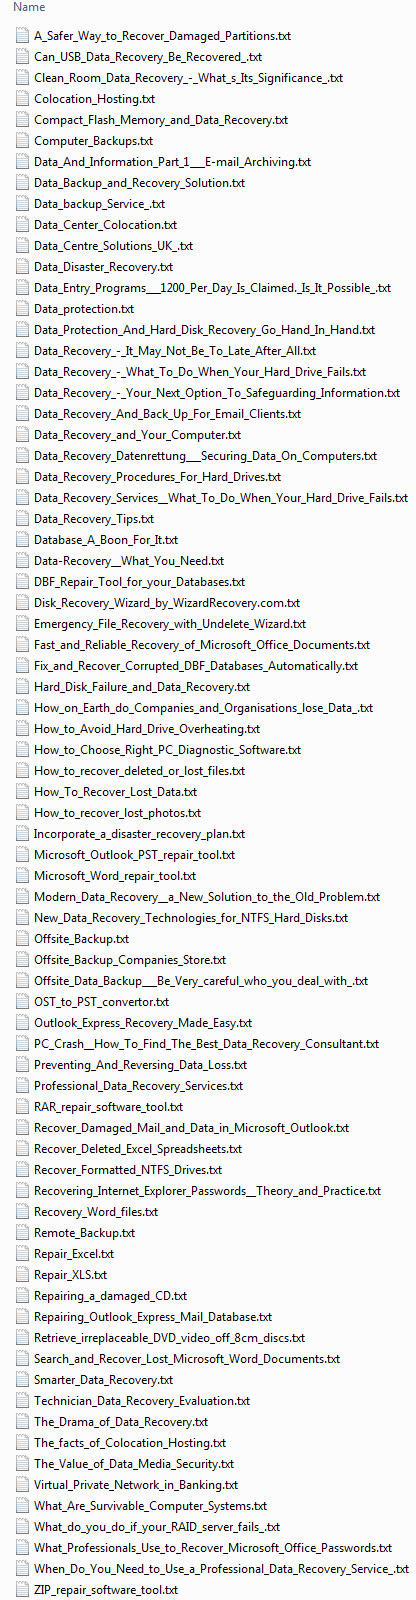 data recovery plr articles